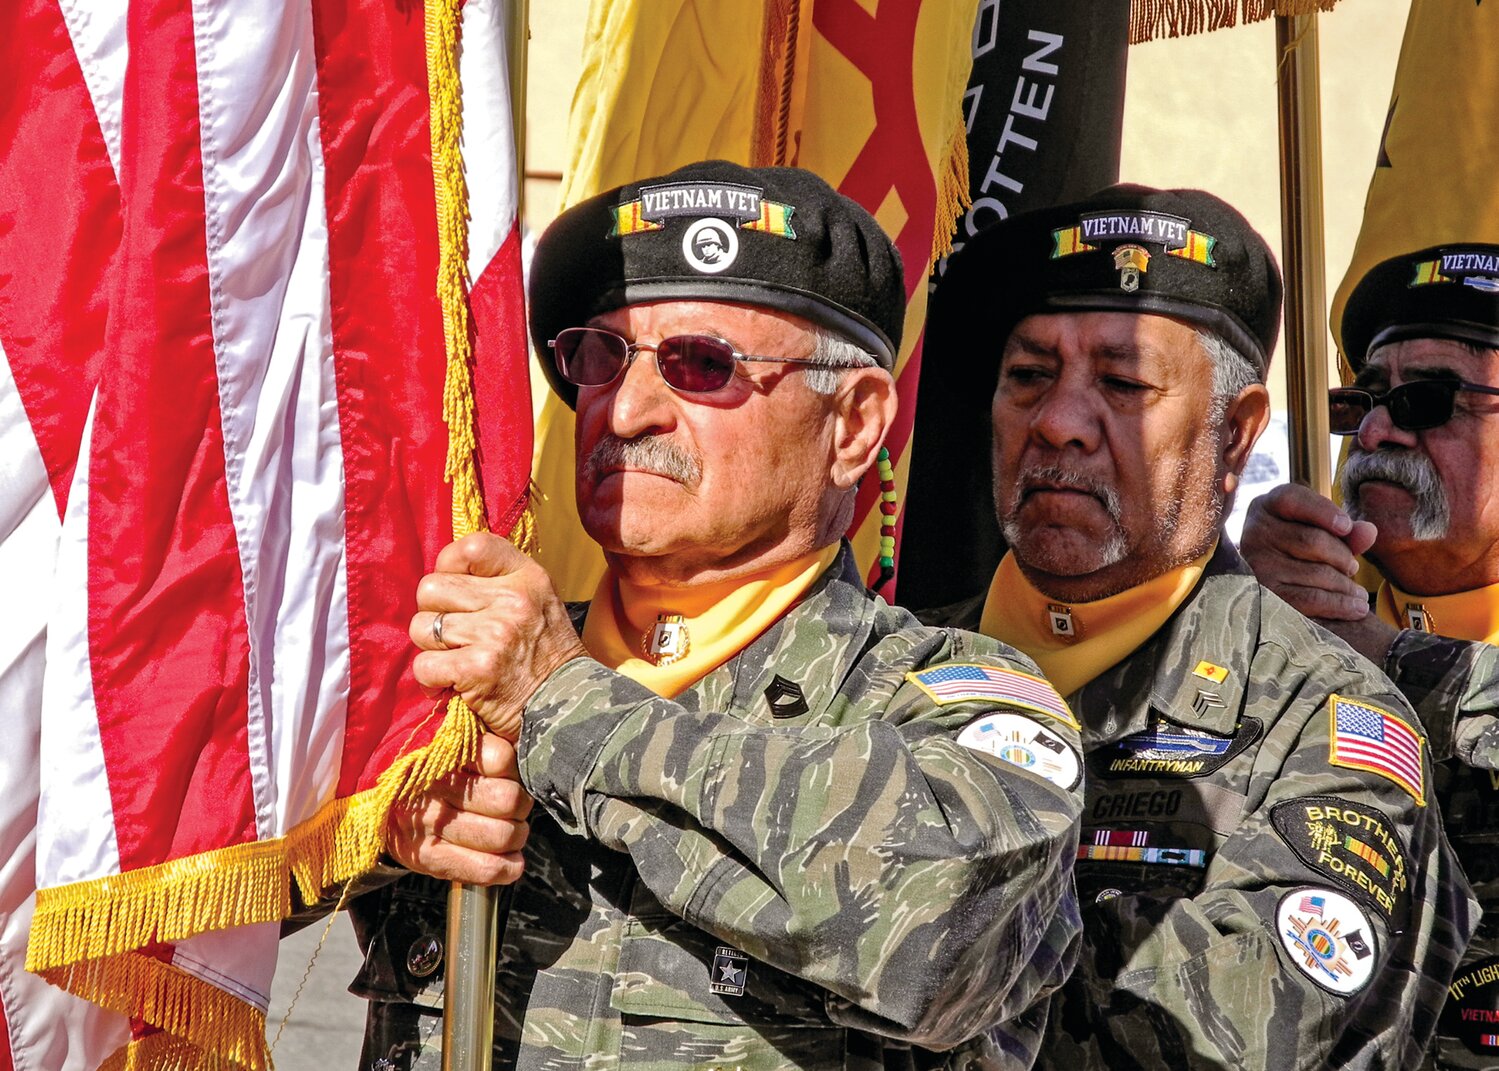 The Veteran's Administration chose Bernalillo County as the site for a national cemetery, though it looked for a whole Sandoval County had the inside track. Members of a Vietnam Veterans of America Northern New Mexico Chapter color guard participated in Memorial Day ceremonies at the Sandoval County Vietnam Veterans Memorial in Bernalillo in 2014. (Bill Diven/Sandoval Signpost)